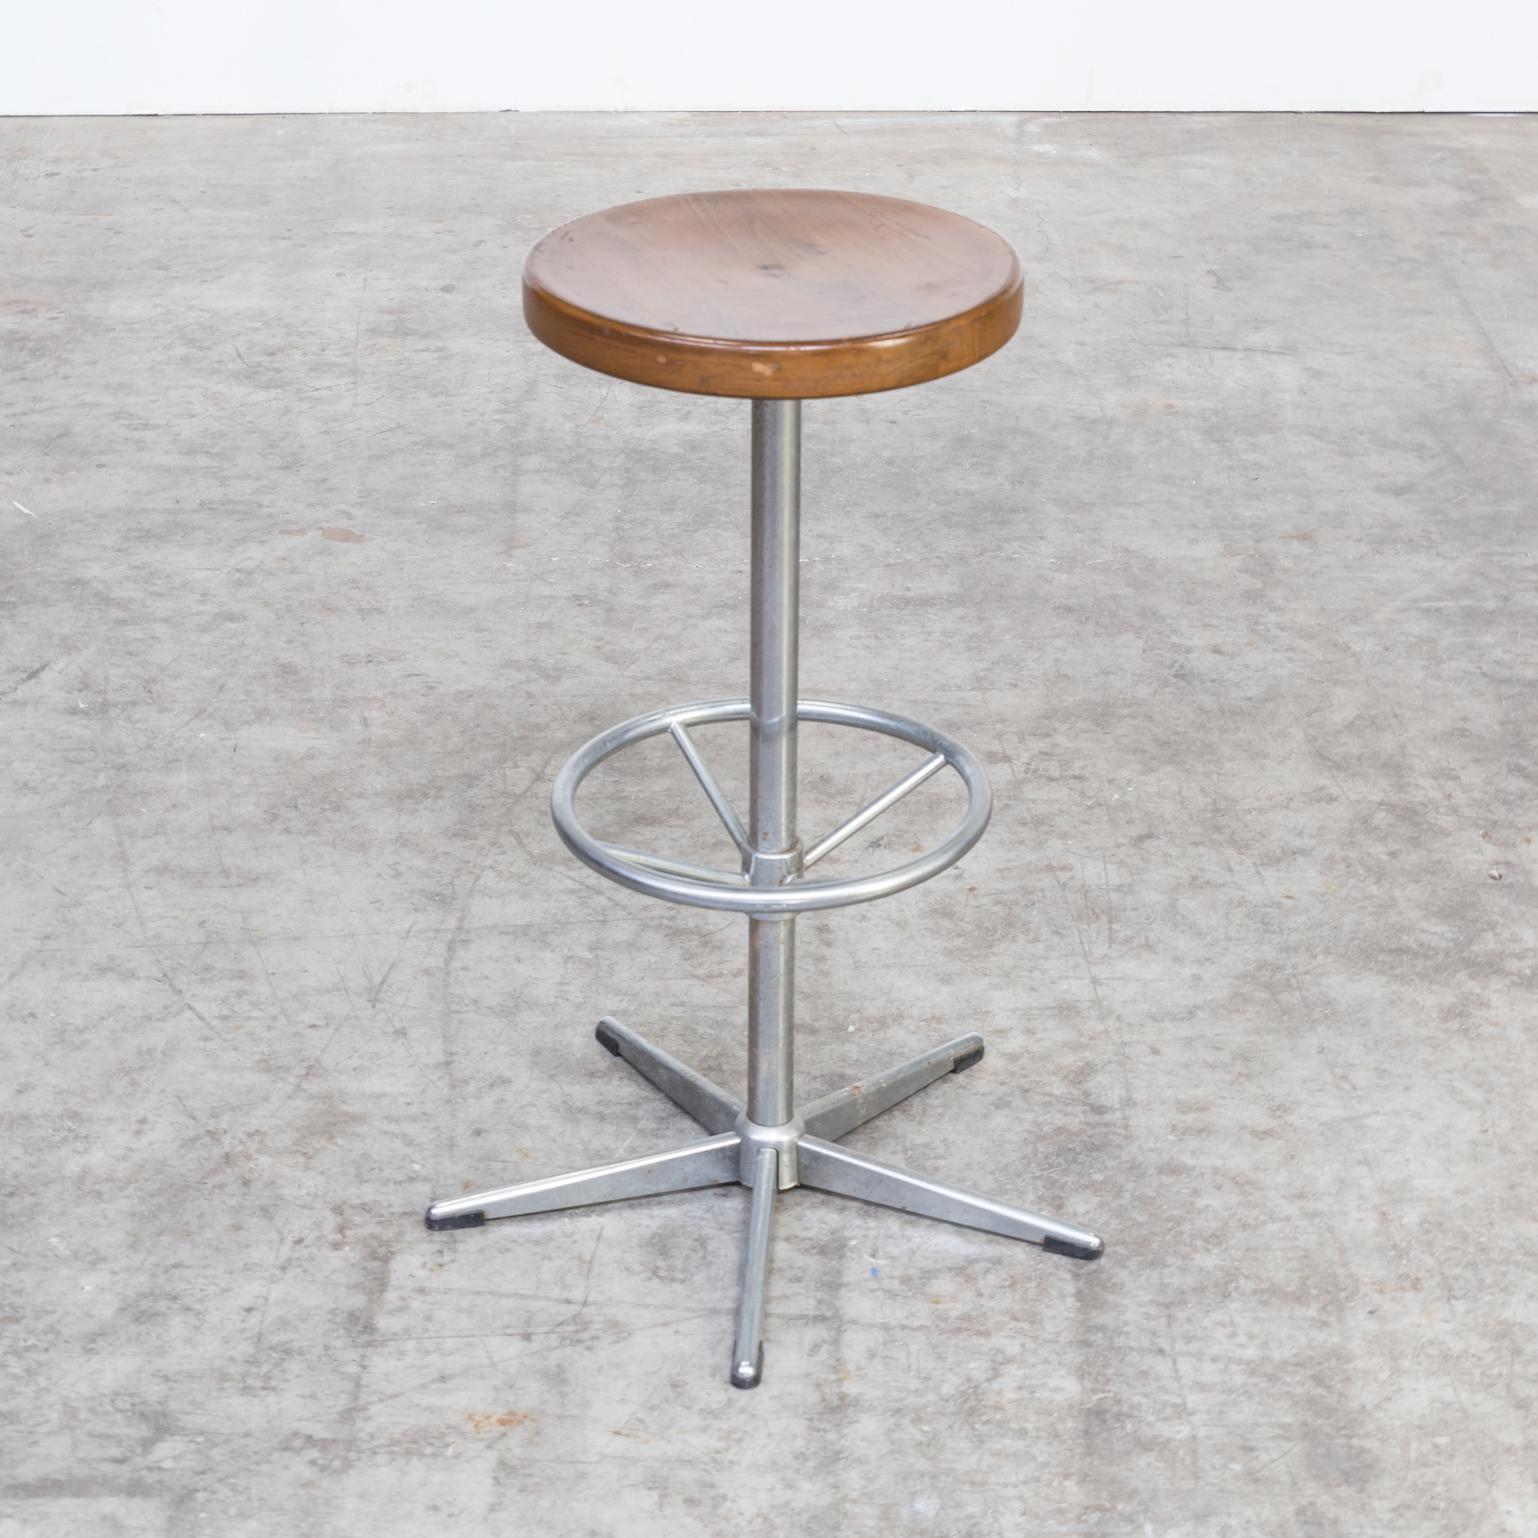 20th Century Midcentury Chrome Framed Stools with Wooden Seat Set of Six For Sale